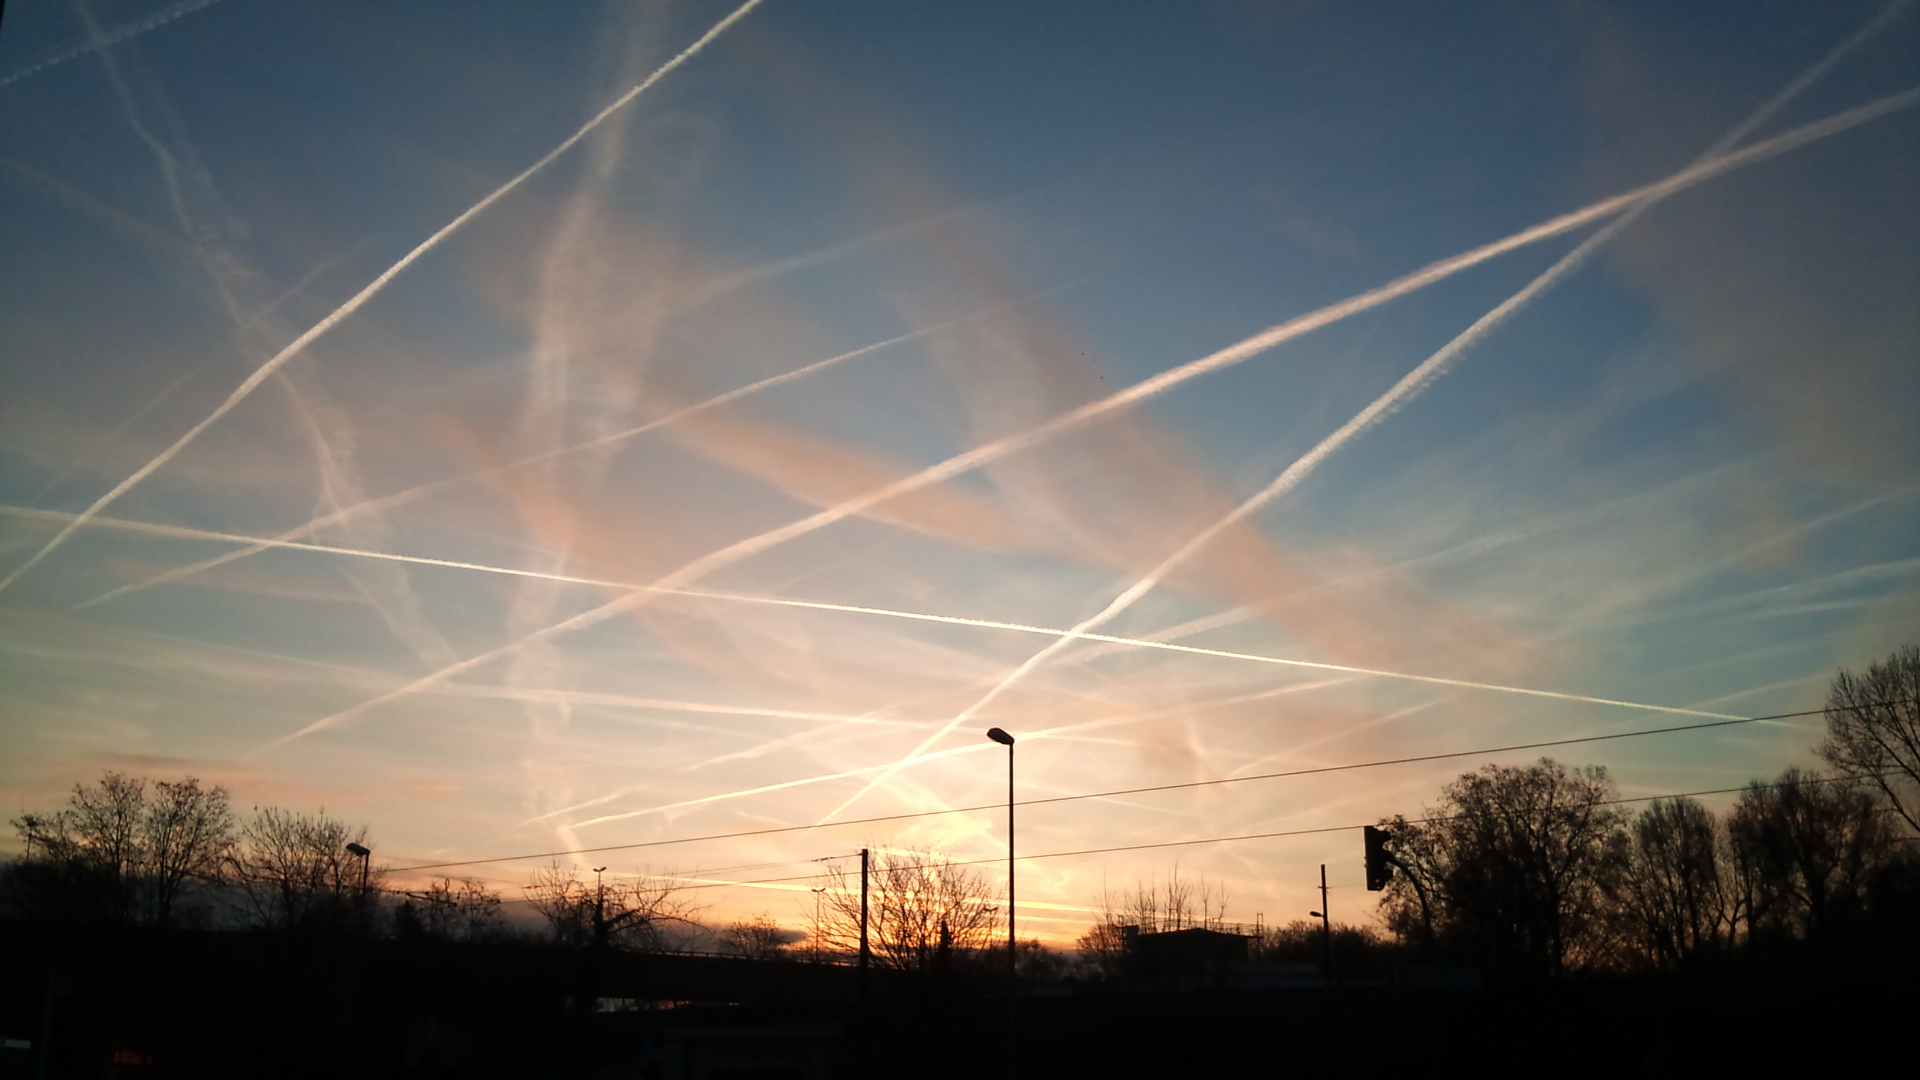 Image: After mocking “chemtrails” for over a decade, global elites suddenly announce geoengineering plan to “dim the sun” with aerial spraying